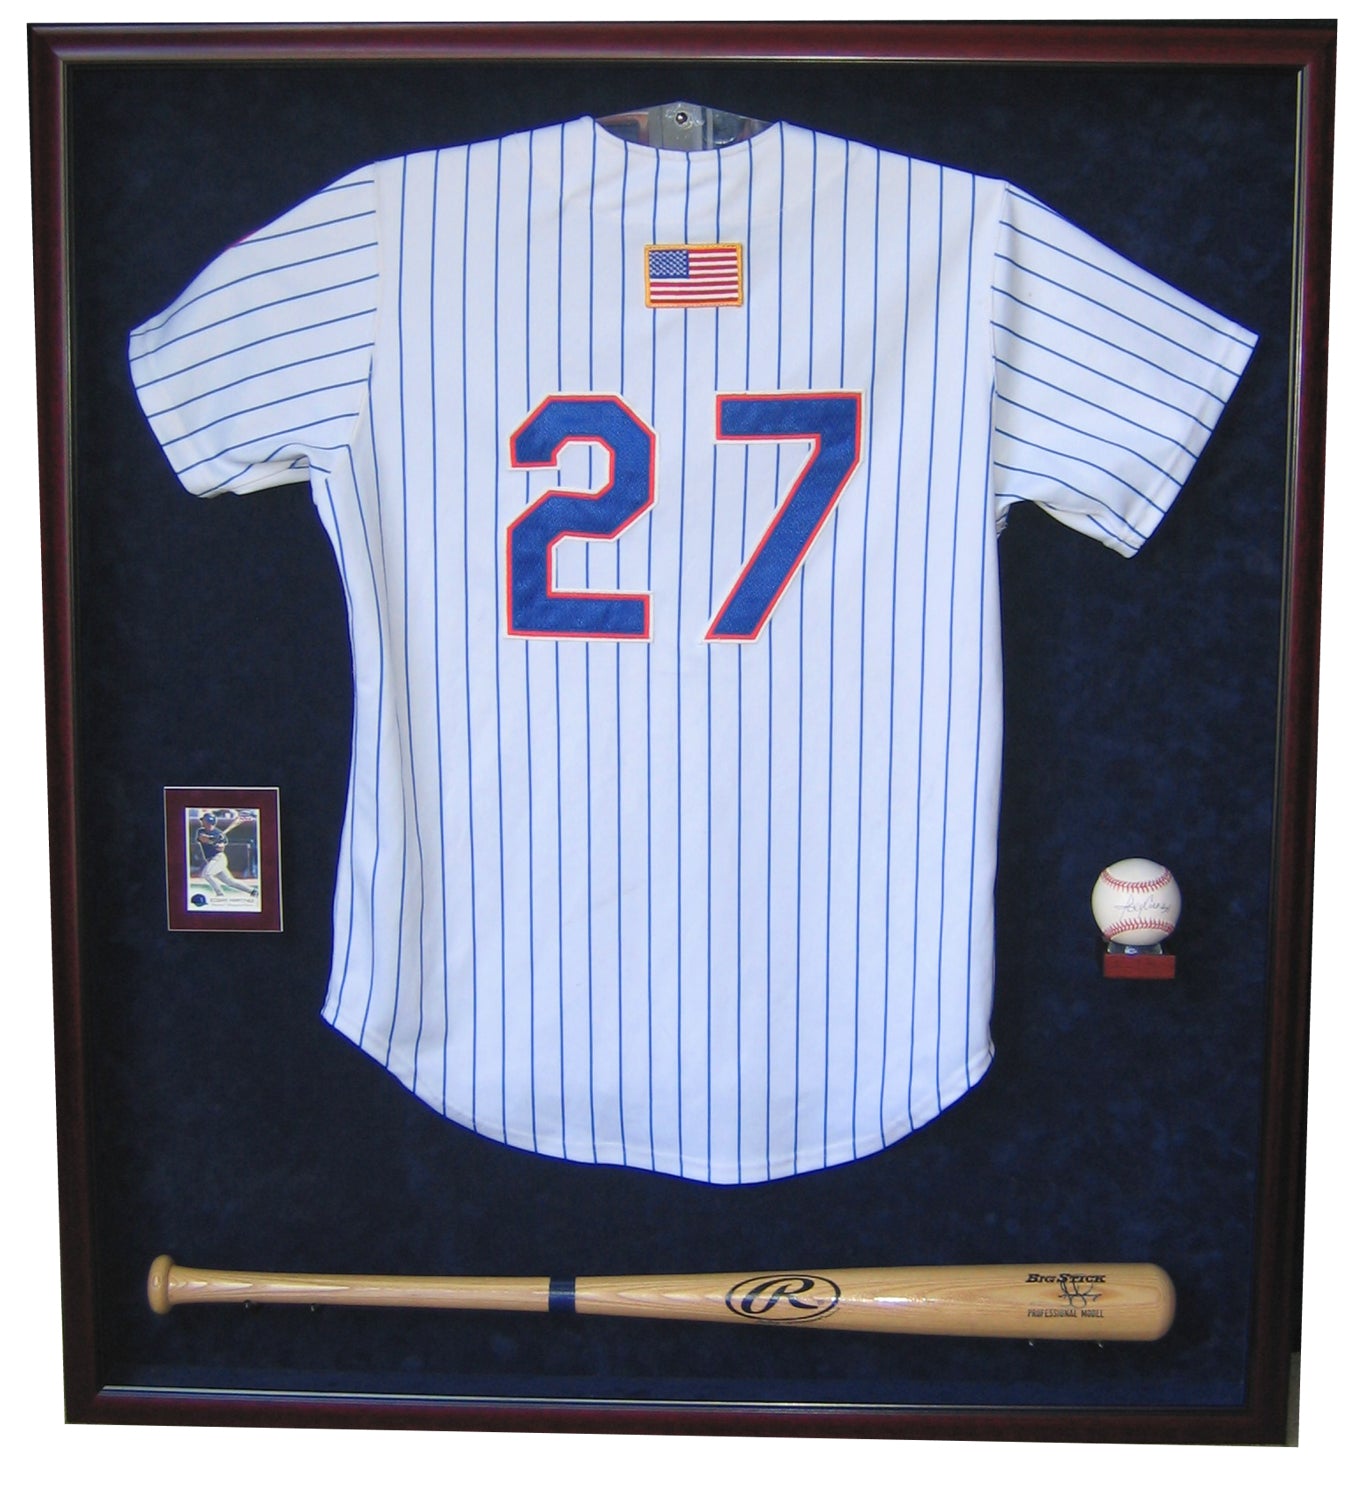 Jersey, Bat, Ball and Card Display Case – Heroes on Display